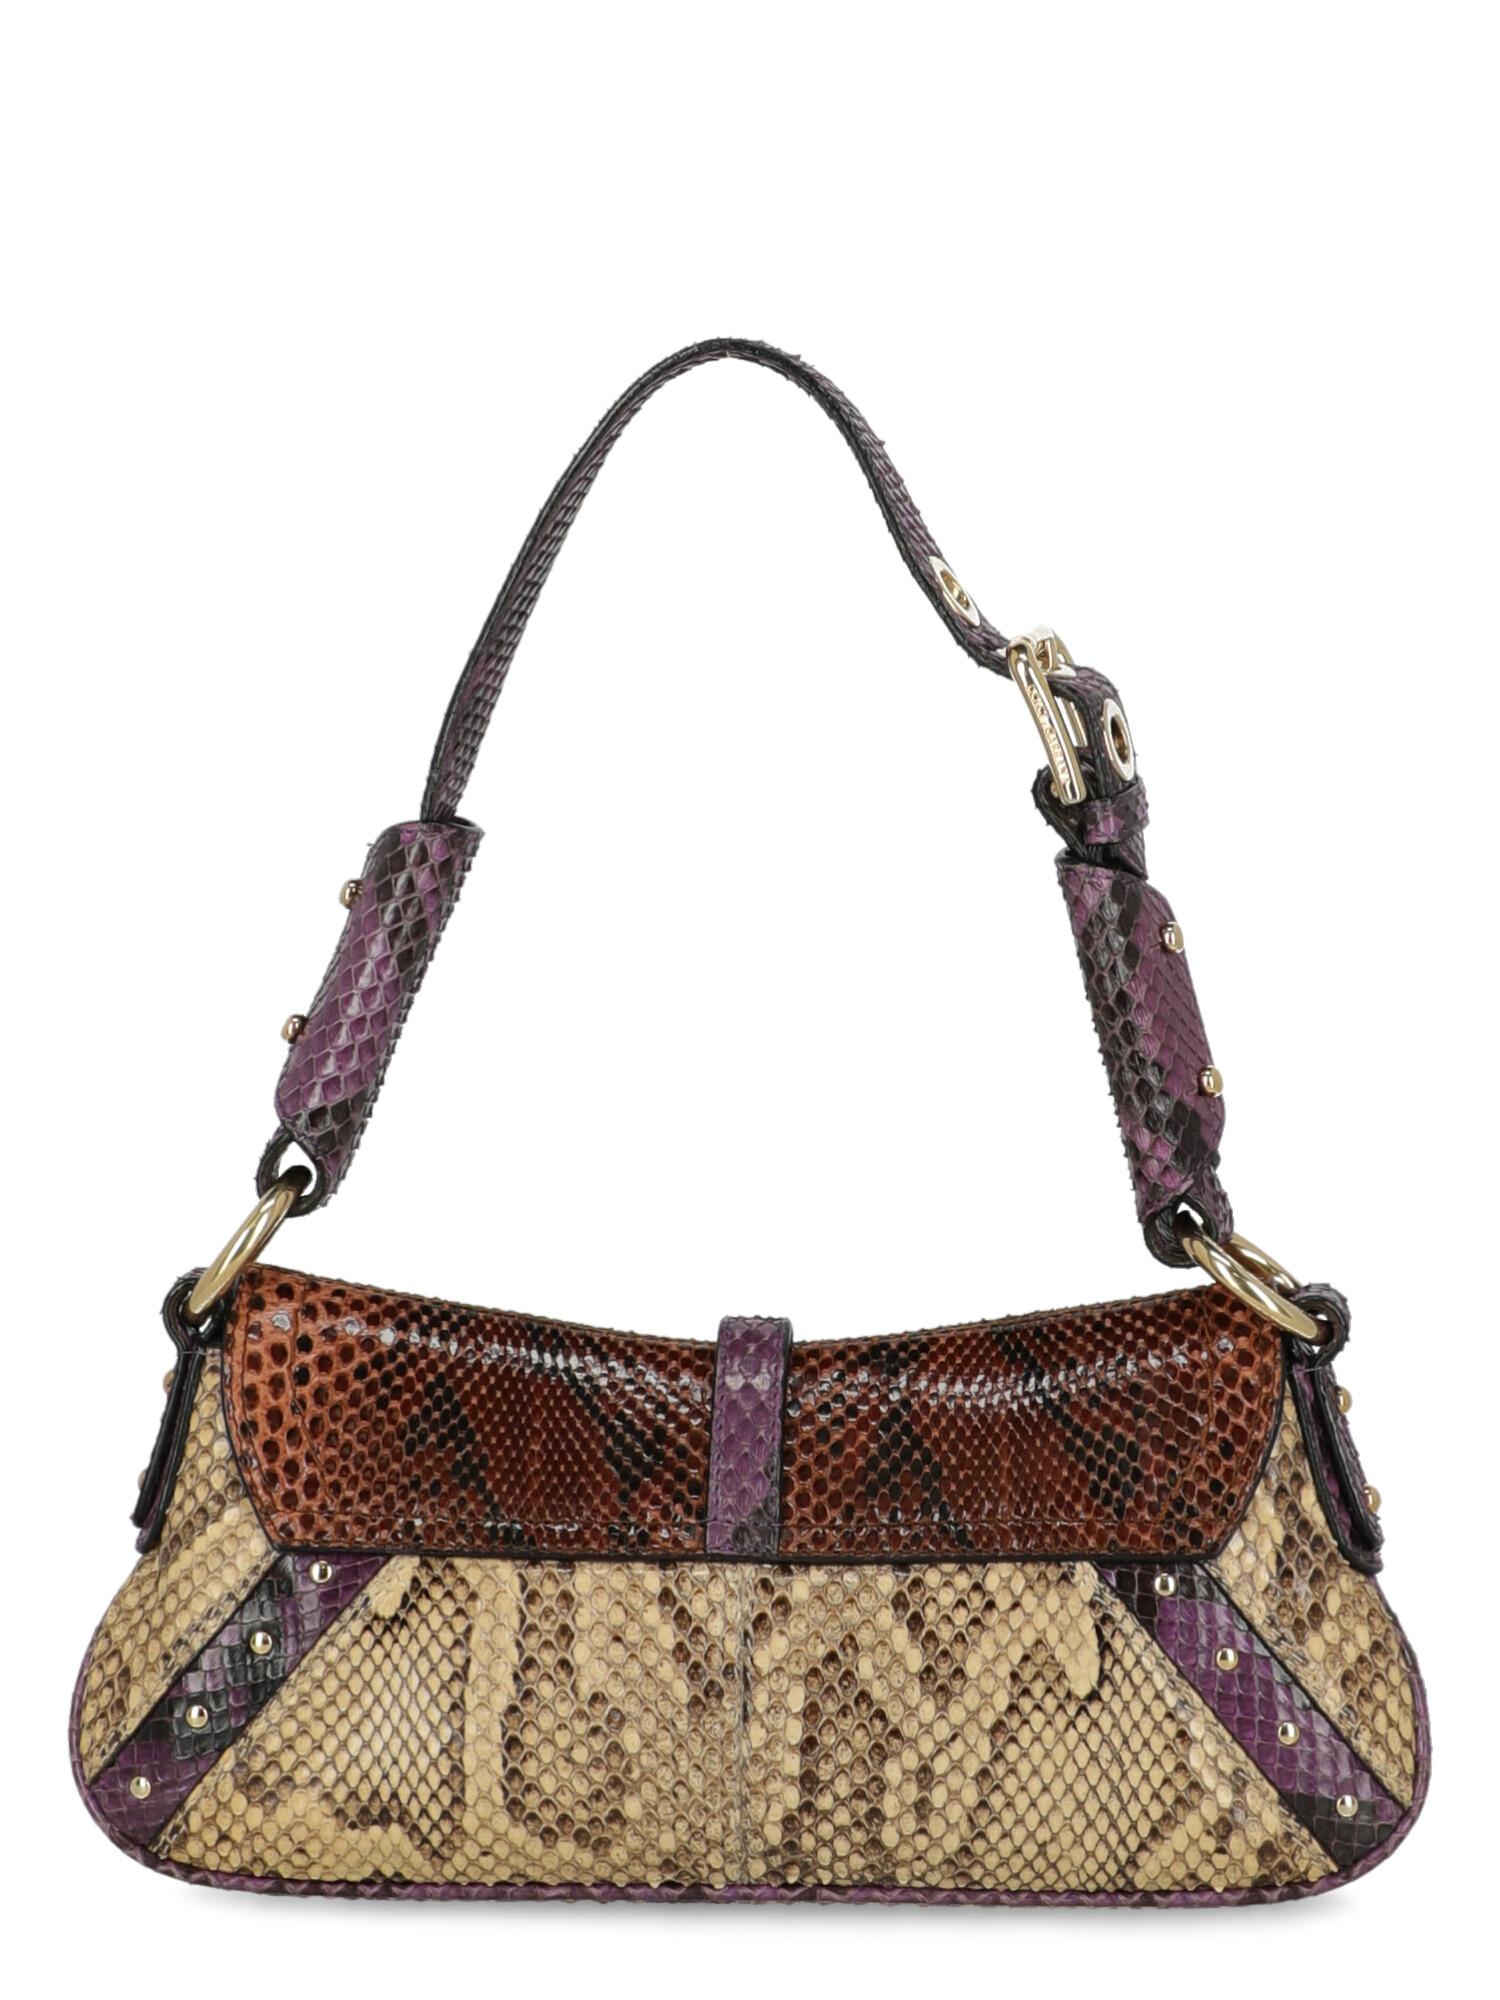 Dolce & Gabbana  Women   Shoulder bags  Beige, Brown, Purple Leather  In Good Condition For Sale In Milan, IT